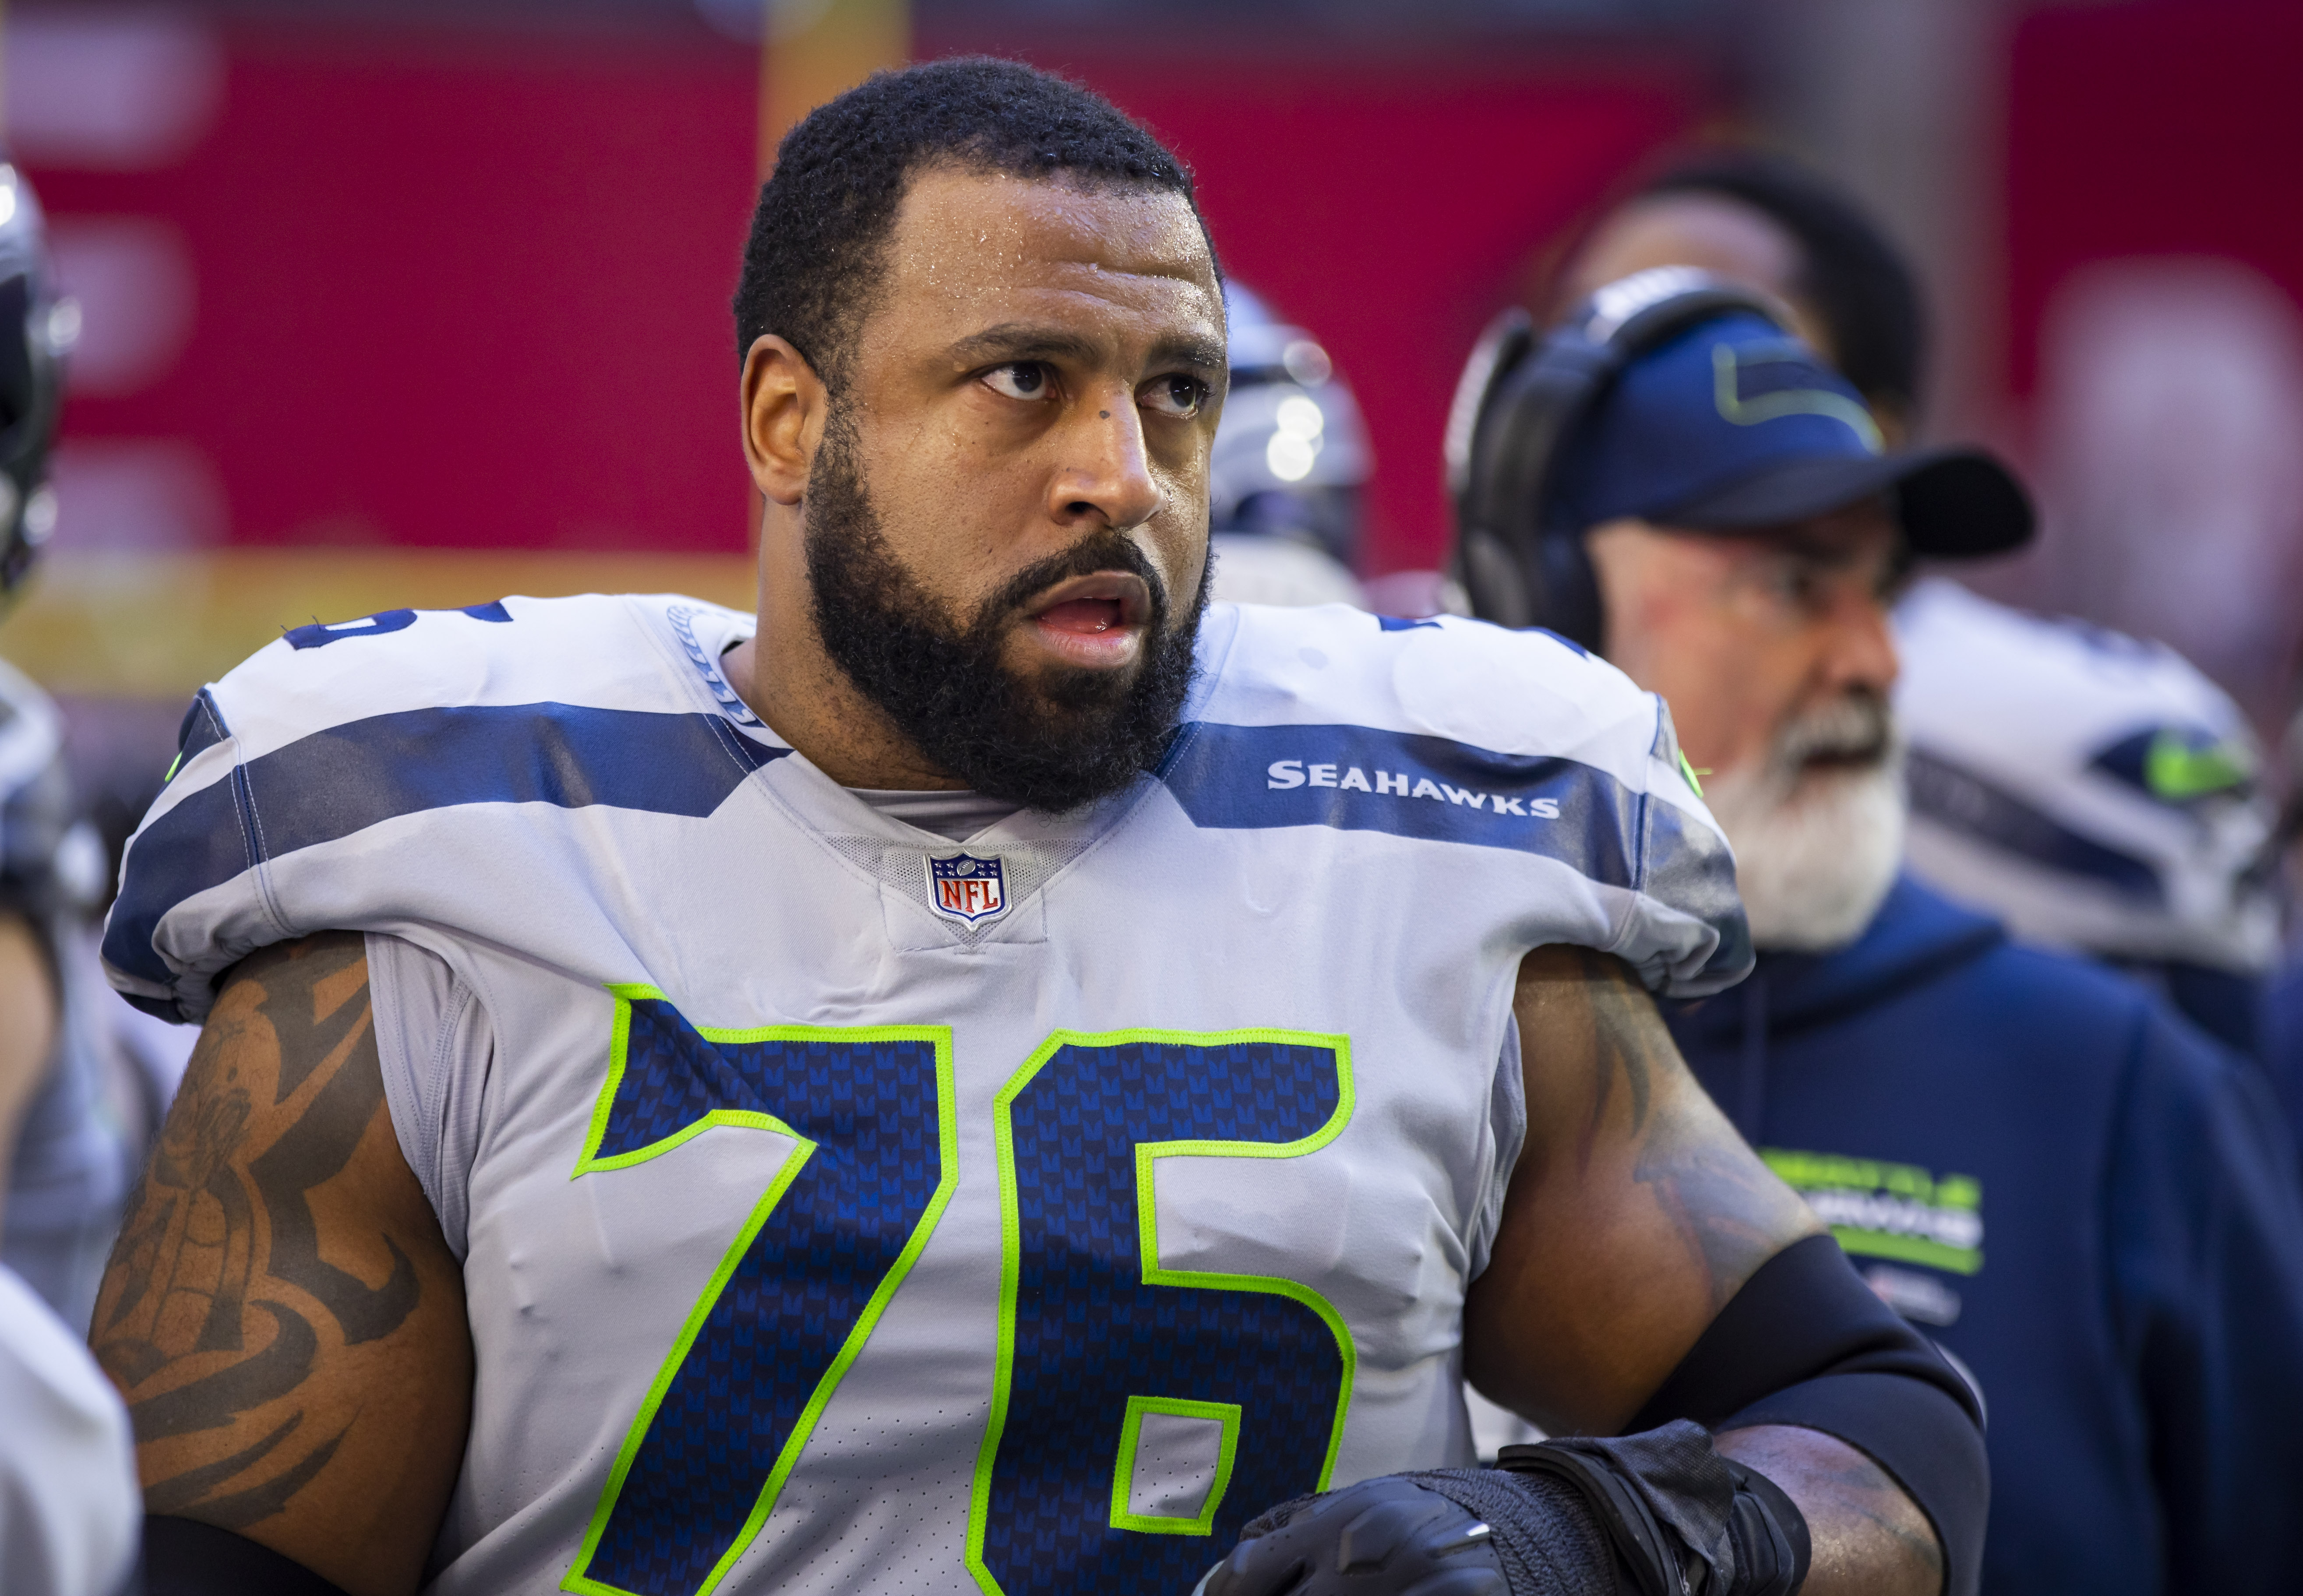 NFL free agent Duane Brown arrested for carrying a gun while going through TSA